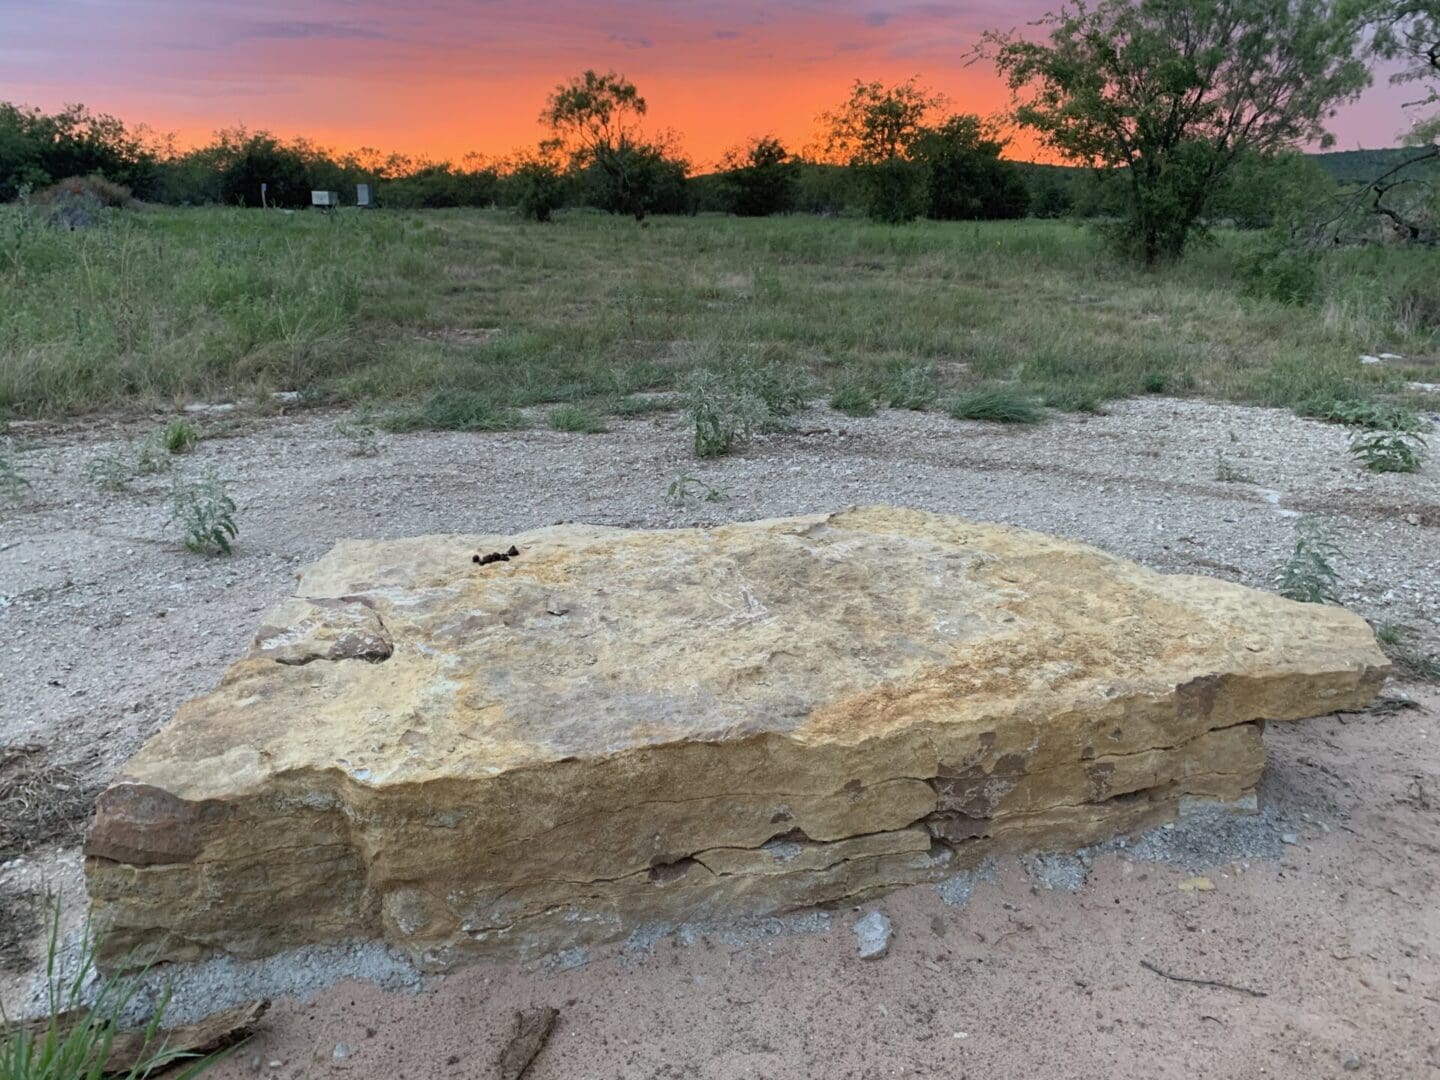 A stone slab sitting in the middle of a field.